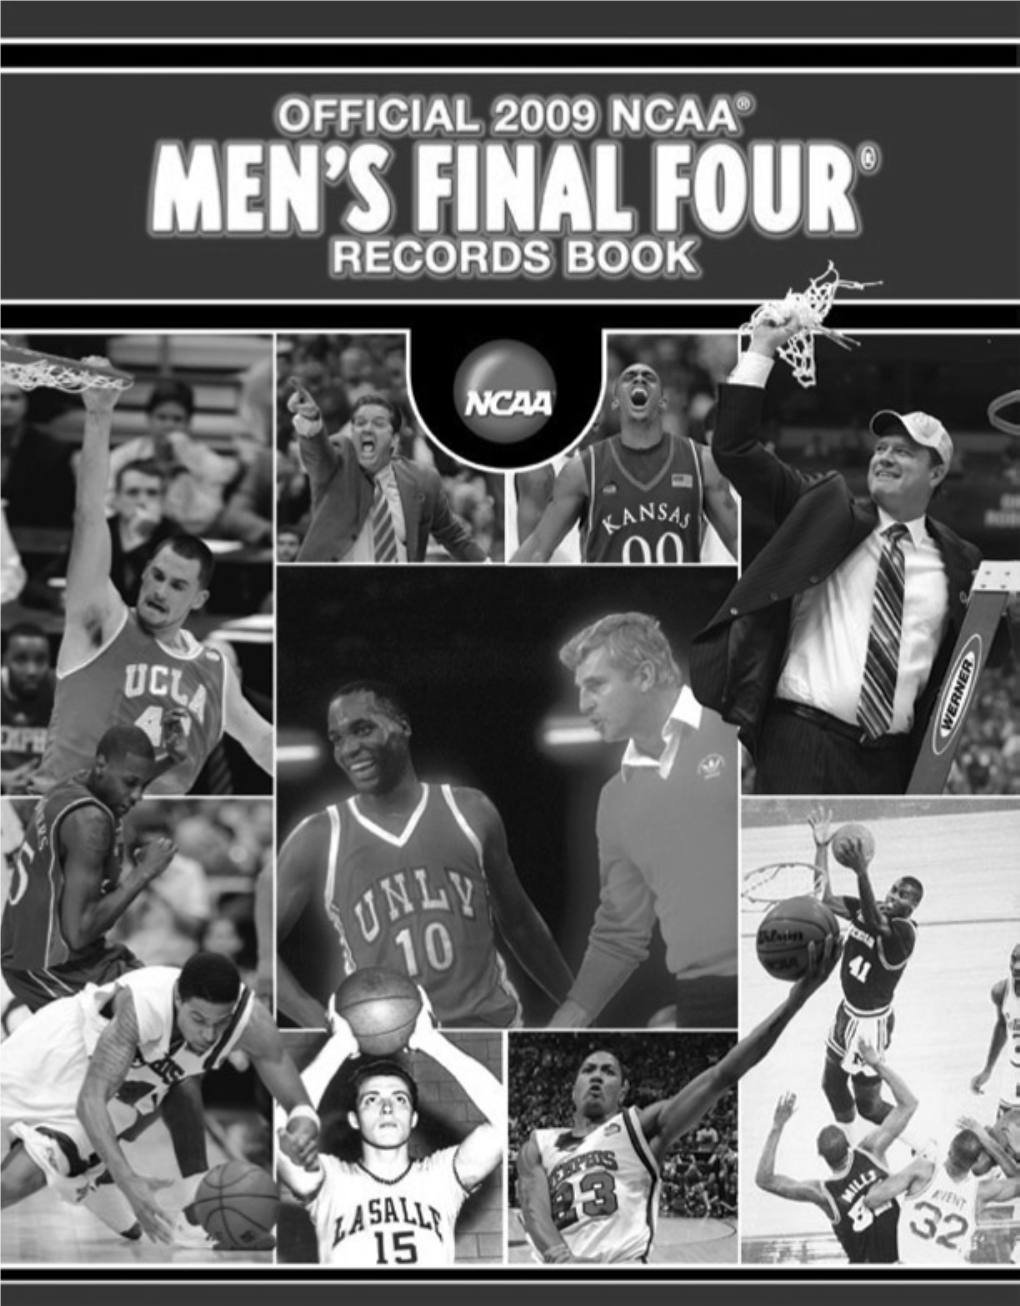 2009 Men's Final Four Records (Introduction and Credits)